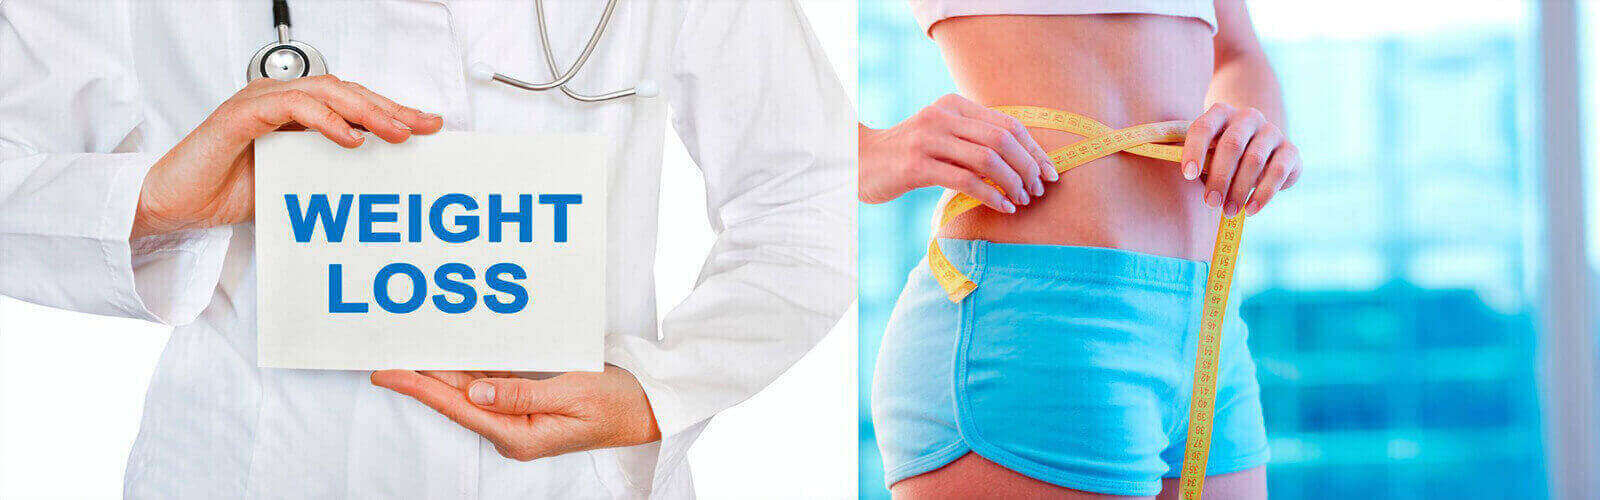 Weight Loss Surgery in Uae